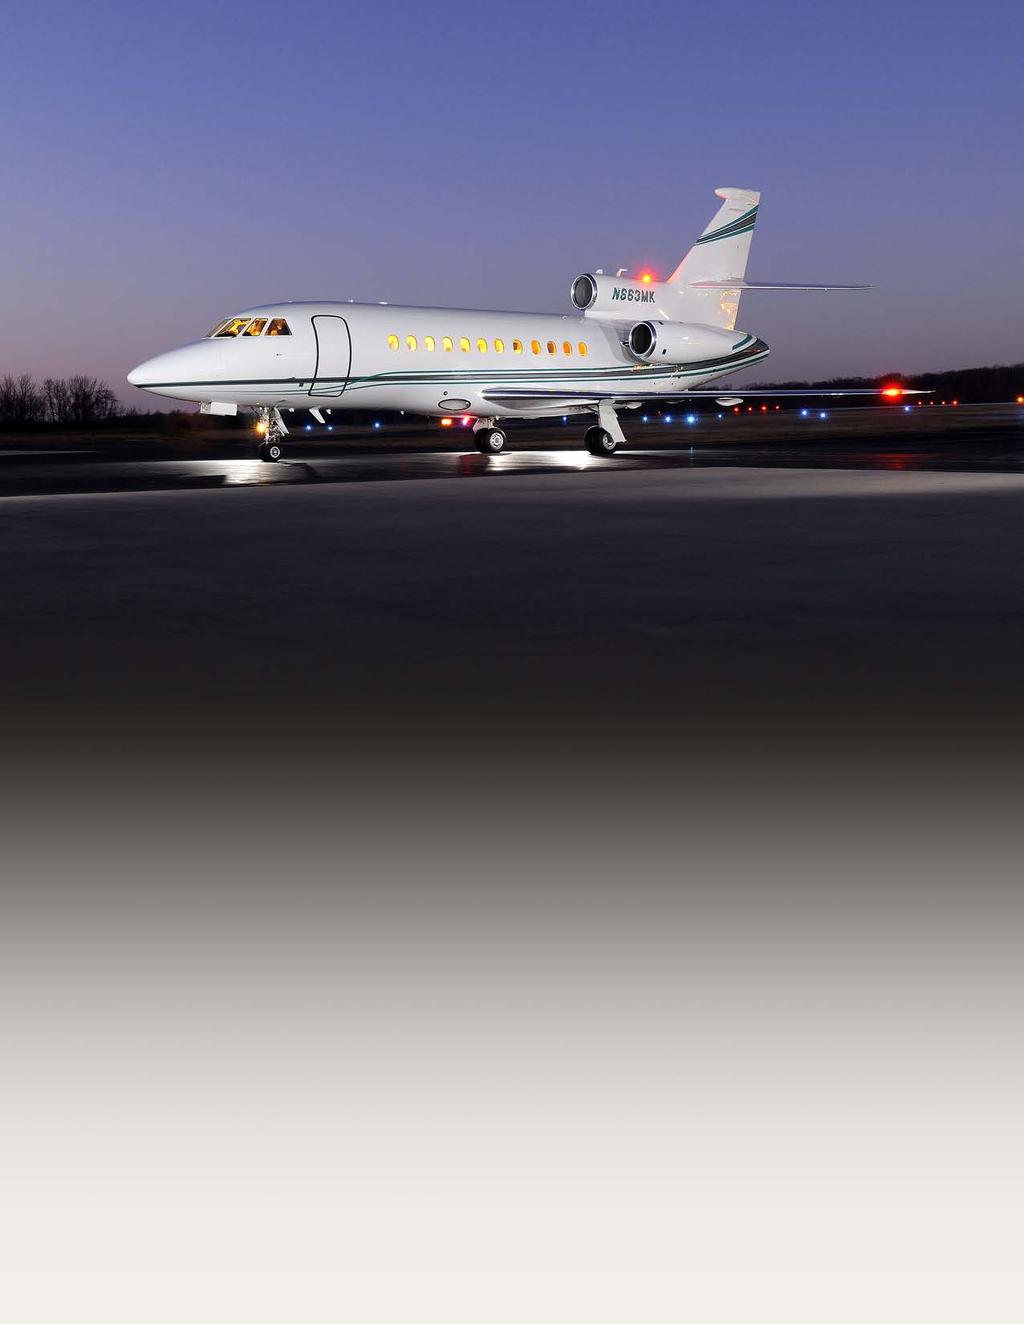 2001 FALCON 900EX N663MK S/N94 Specifications and